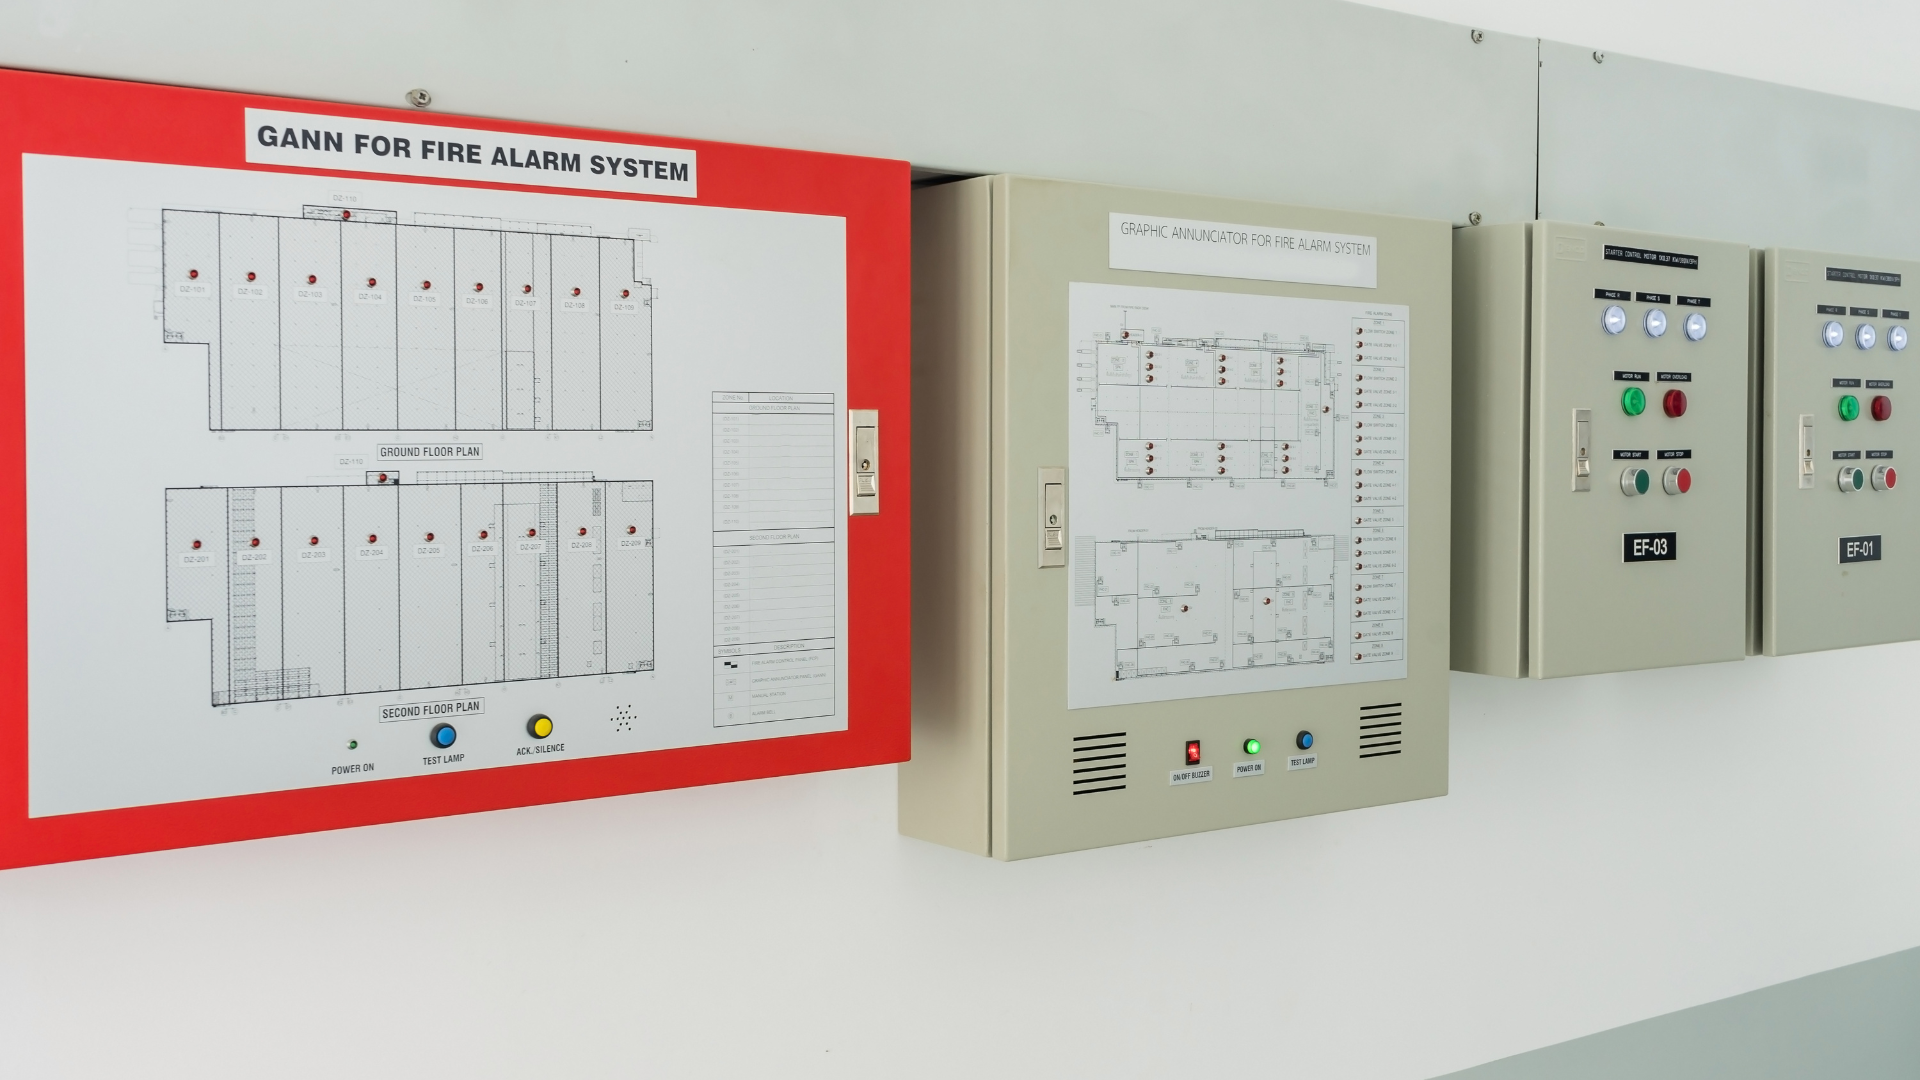 MLPS used in Fire Alarm Control Panel